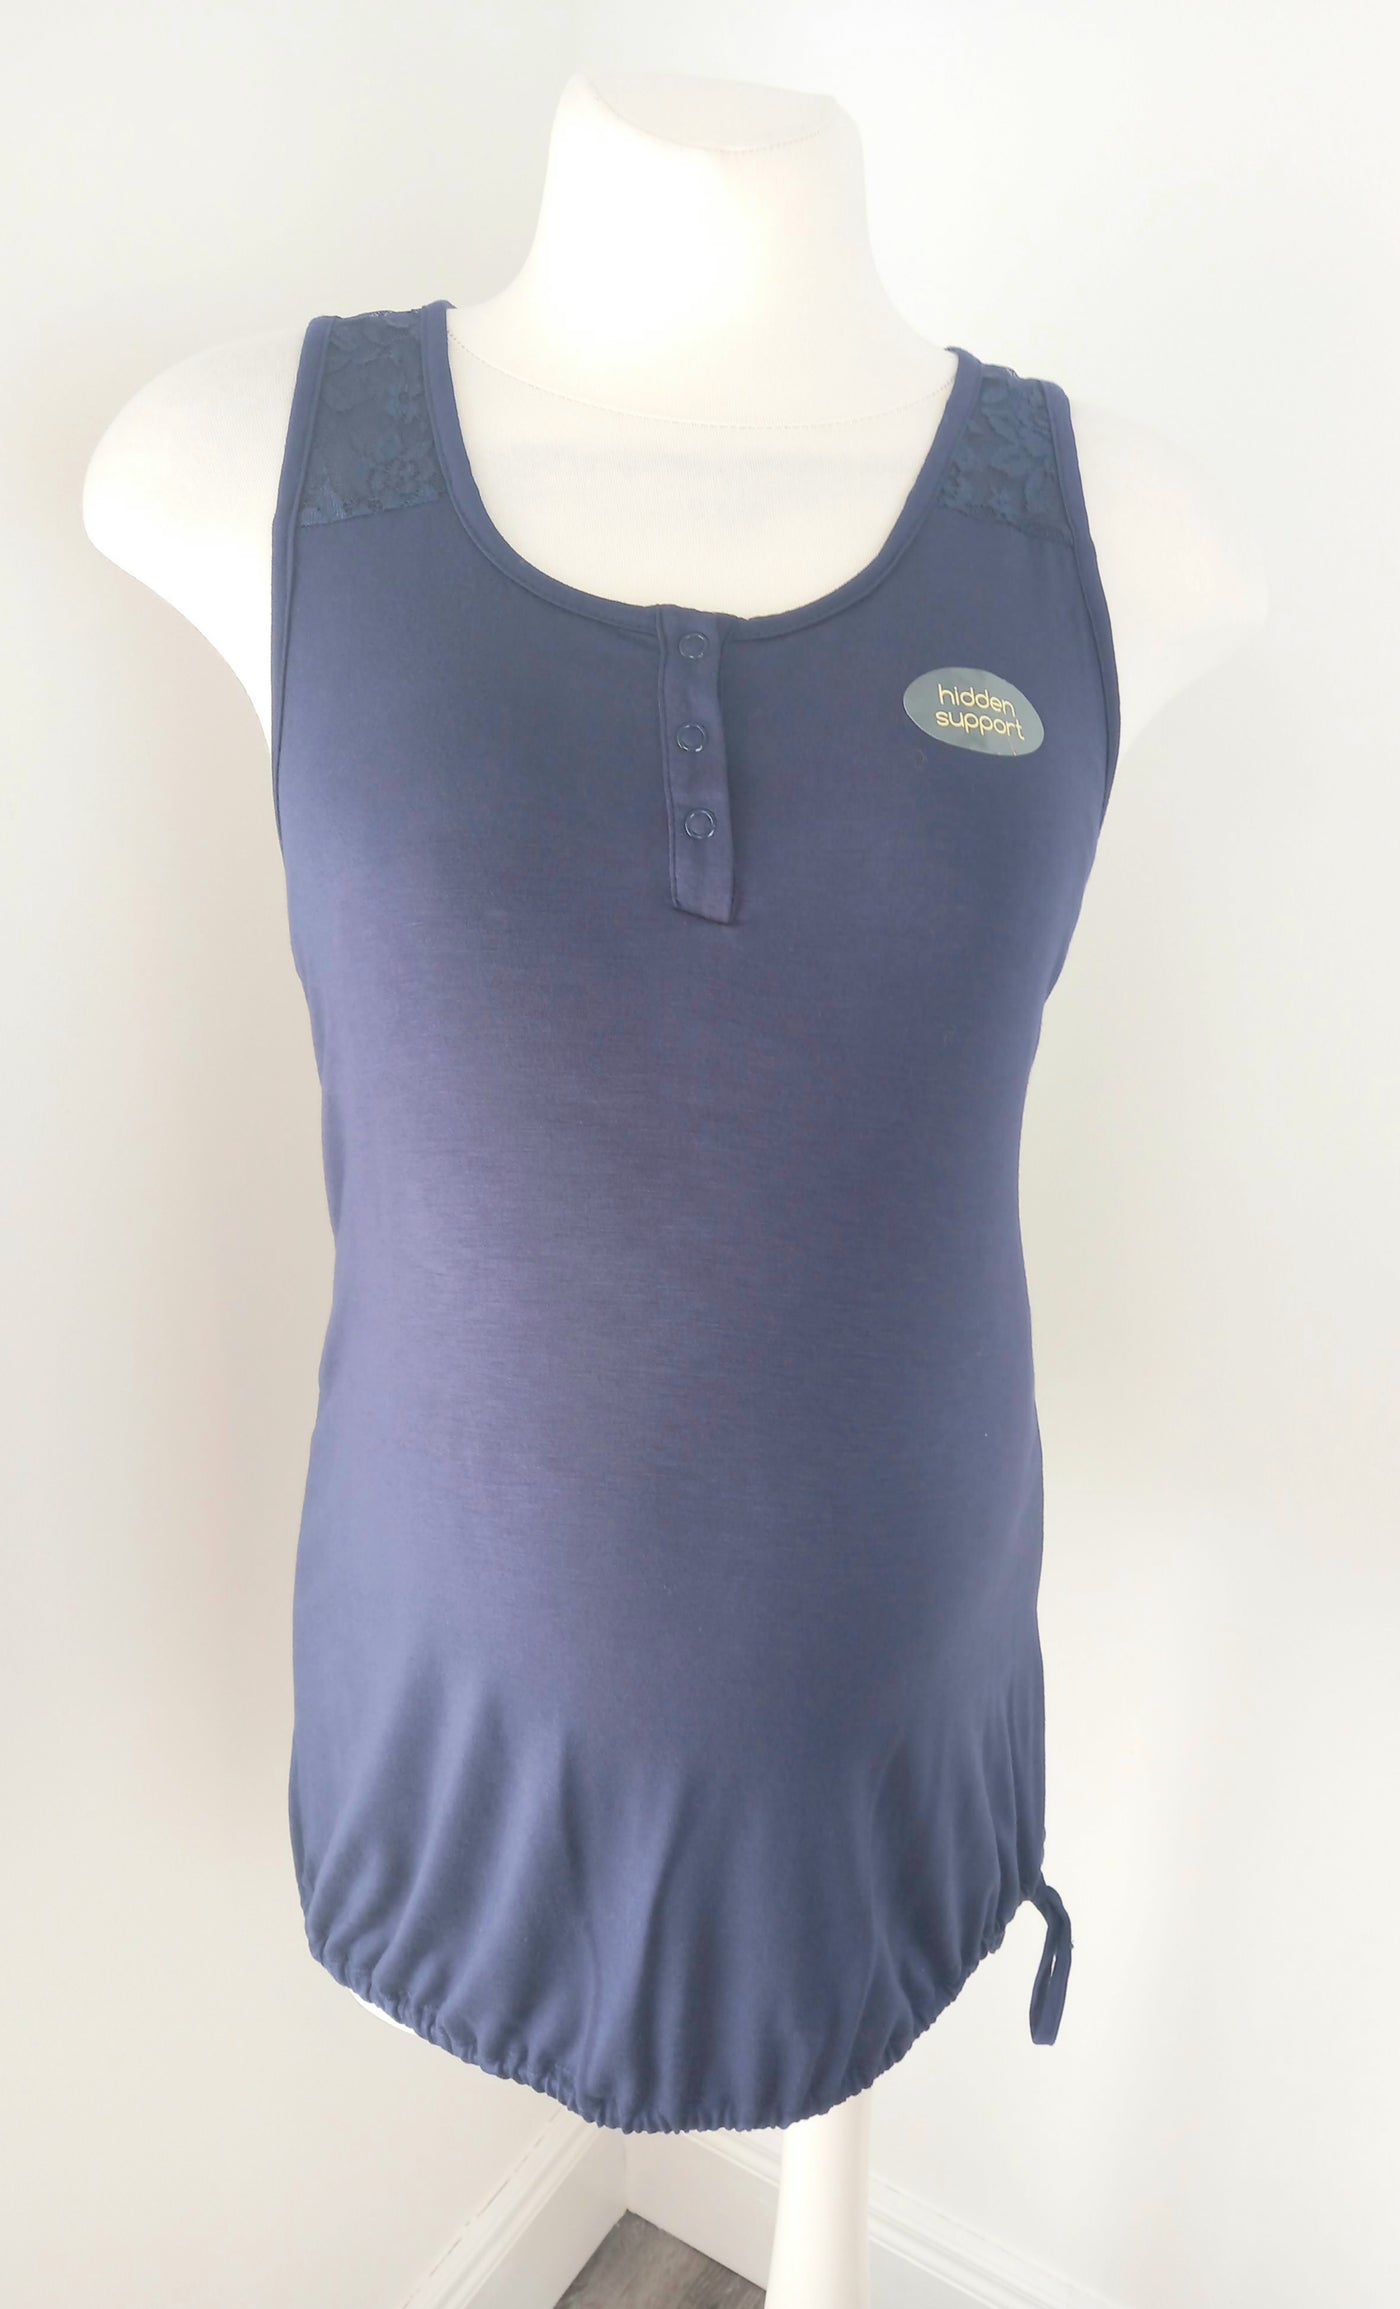 Blooming Marvellous navy sleeveless nursing top with lace shoulder detail, drawstring bottom and popper buttons (BNWT) - Size L (Approx UK 12/14)